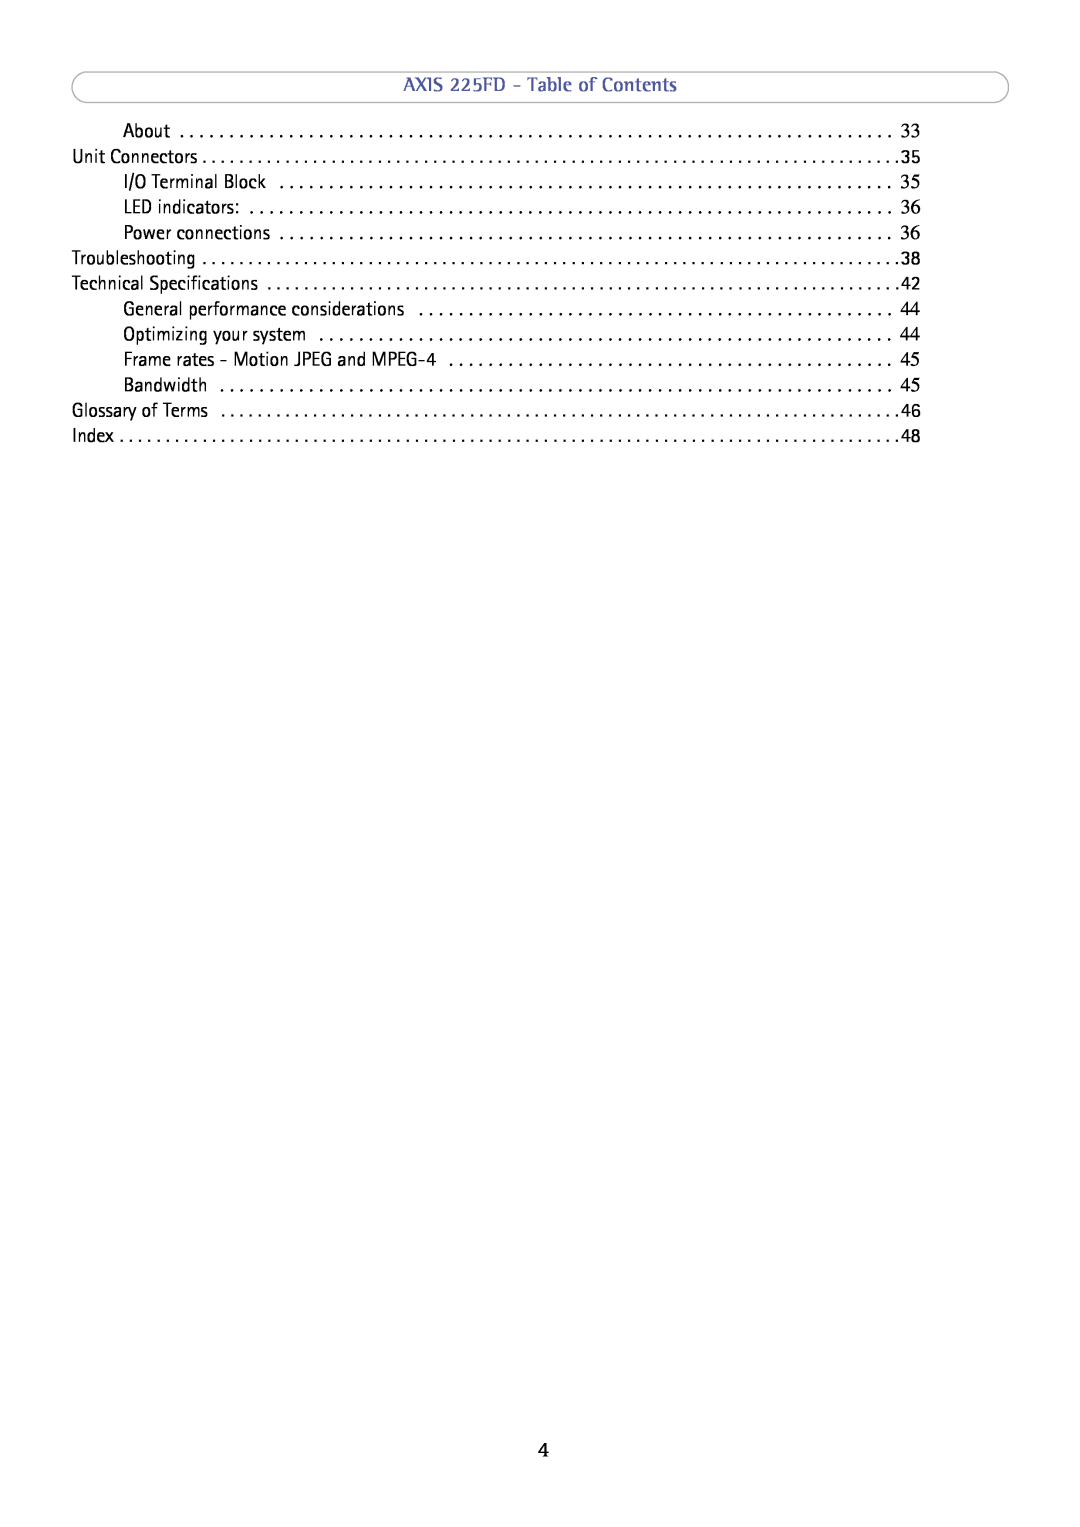 Axis Communications axis fixed dome network camera user manual AXIS 225FD - Table of Contents, Glossary of Terms Index 